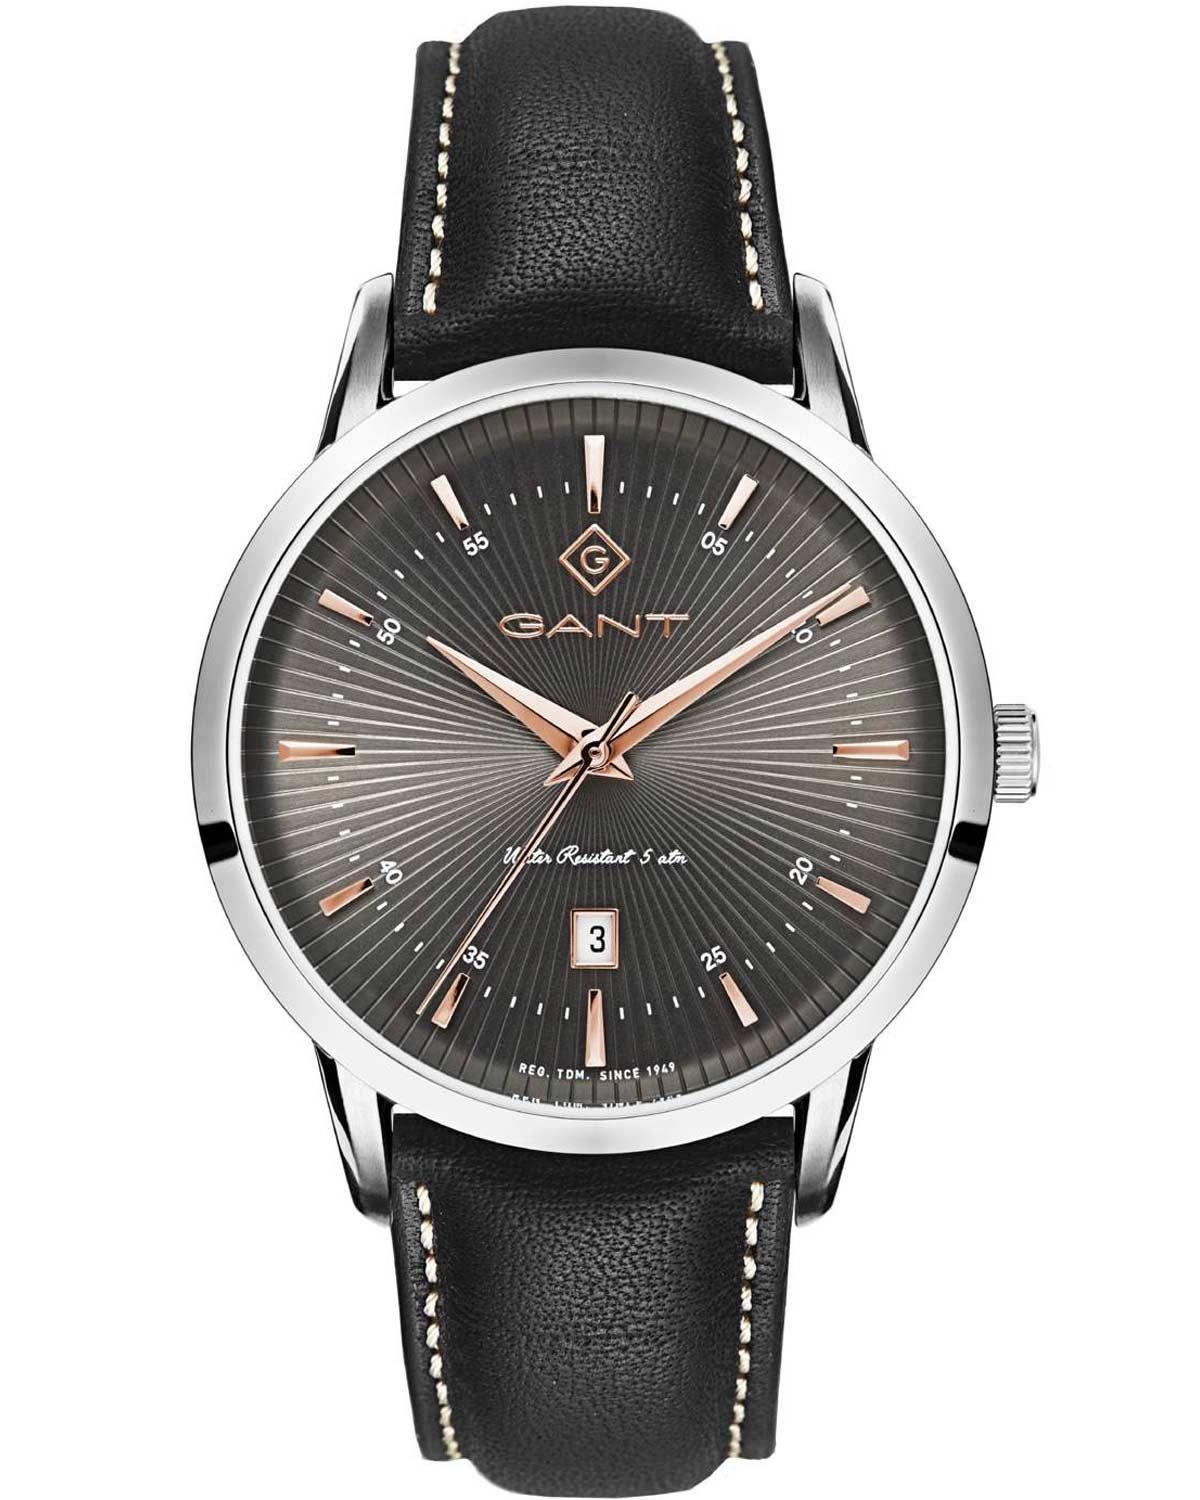 GANT Houston - G107002, Silver case with Black Leather Strap